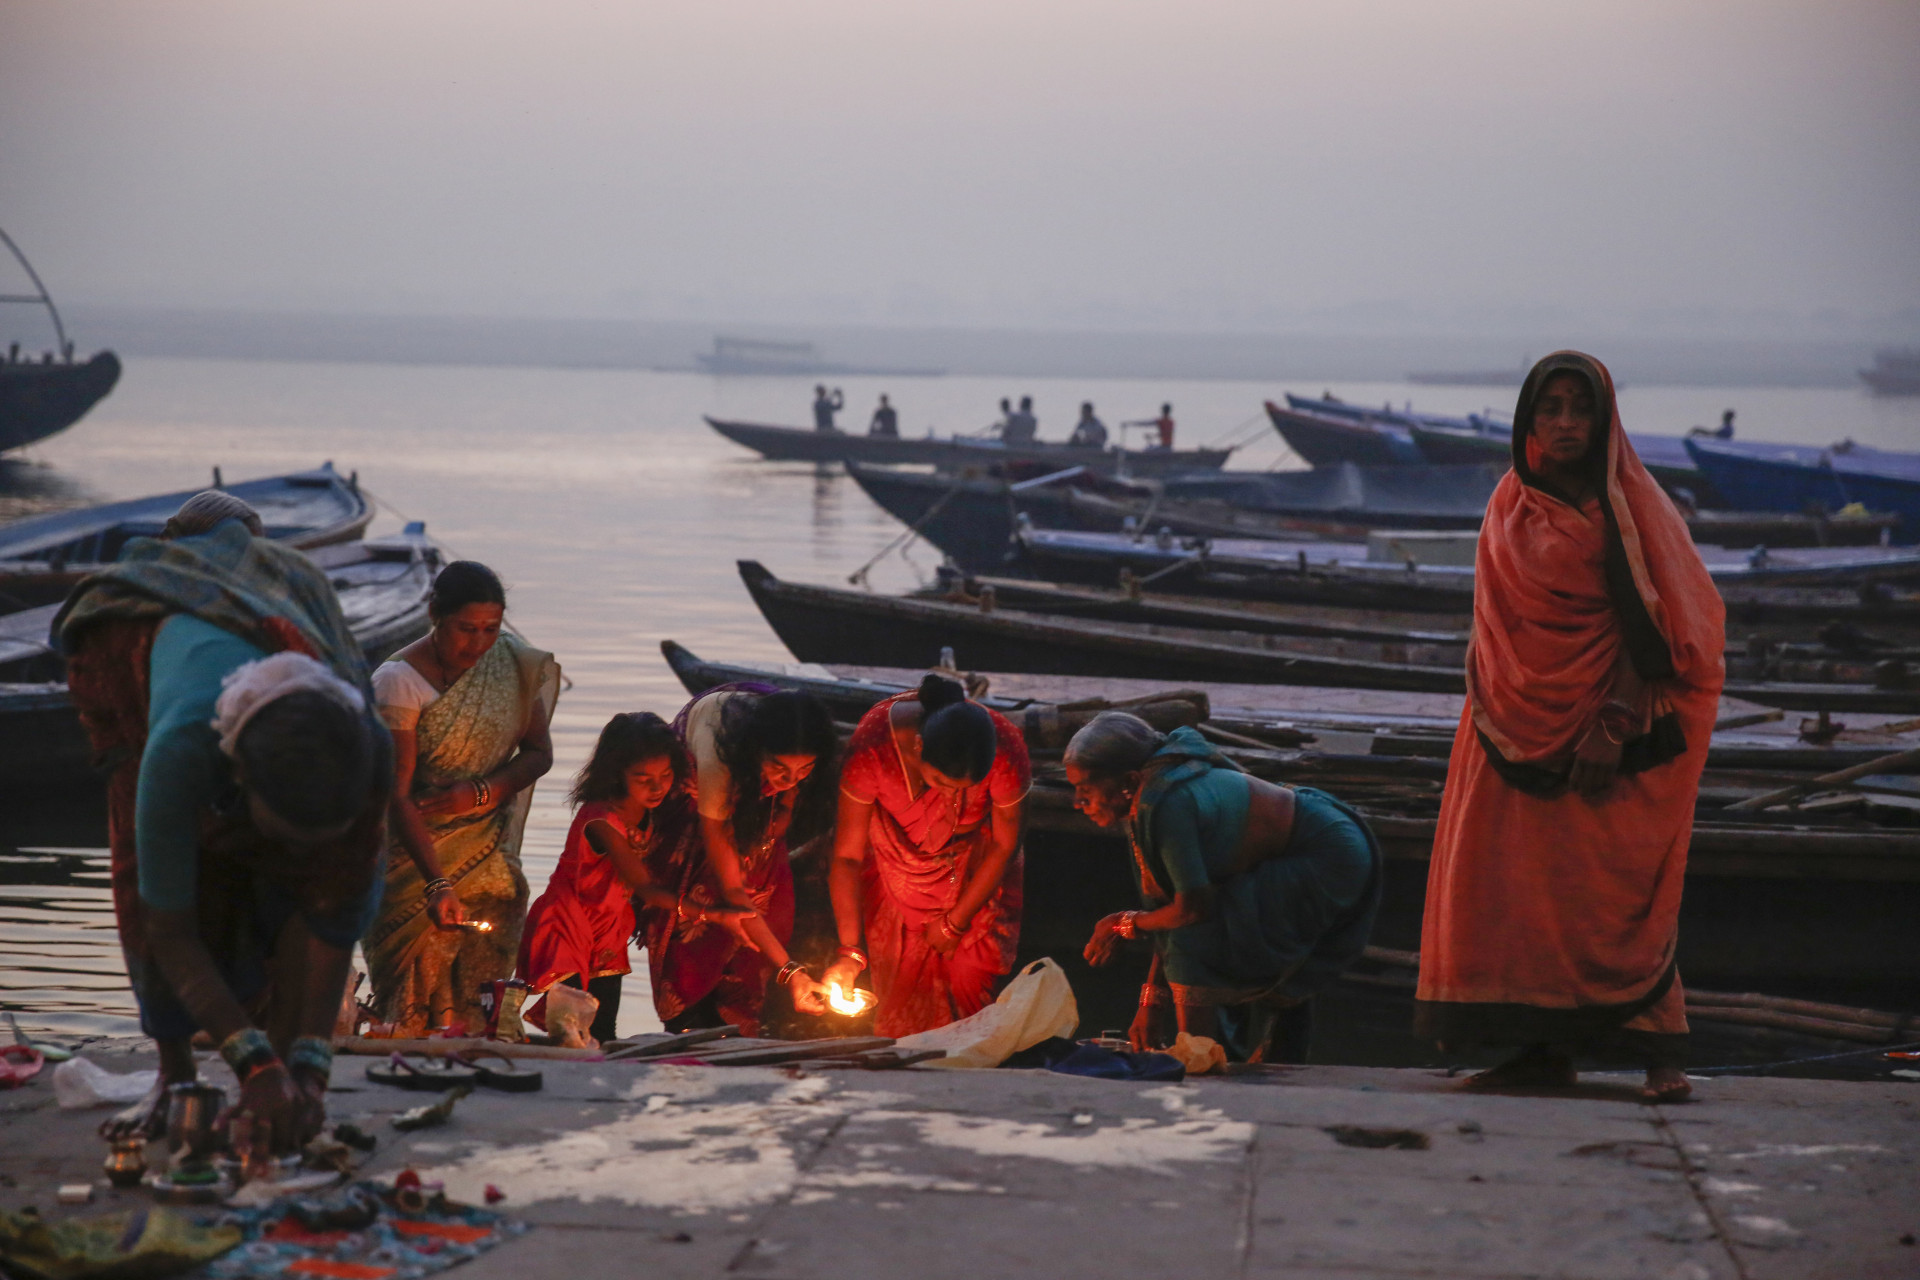 When a person dies in India, their body is cremated and their ashes are thrown into the Ganges river. It's believed that its waters are sacred and purifying.<p><a href="https://www.msn.com/en-in/community/channel/vid-7xx8mnucu55yw63we9va2gwr7uihbxwc68fxqp25x6tg4ftibpra?cvid=94631541bc0f4f89bfd59158d696ad7e">Follow us and access great exclusive content every day</a></p>